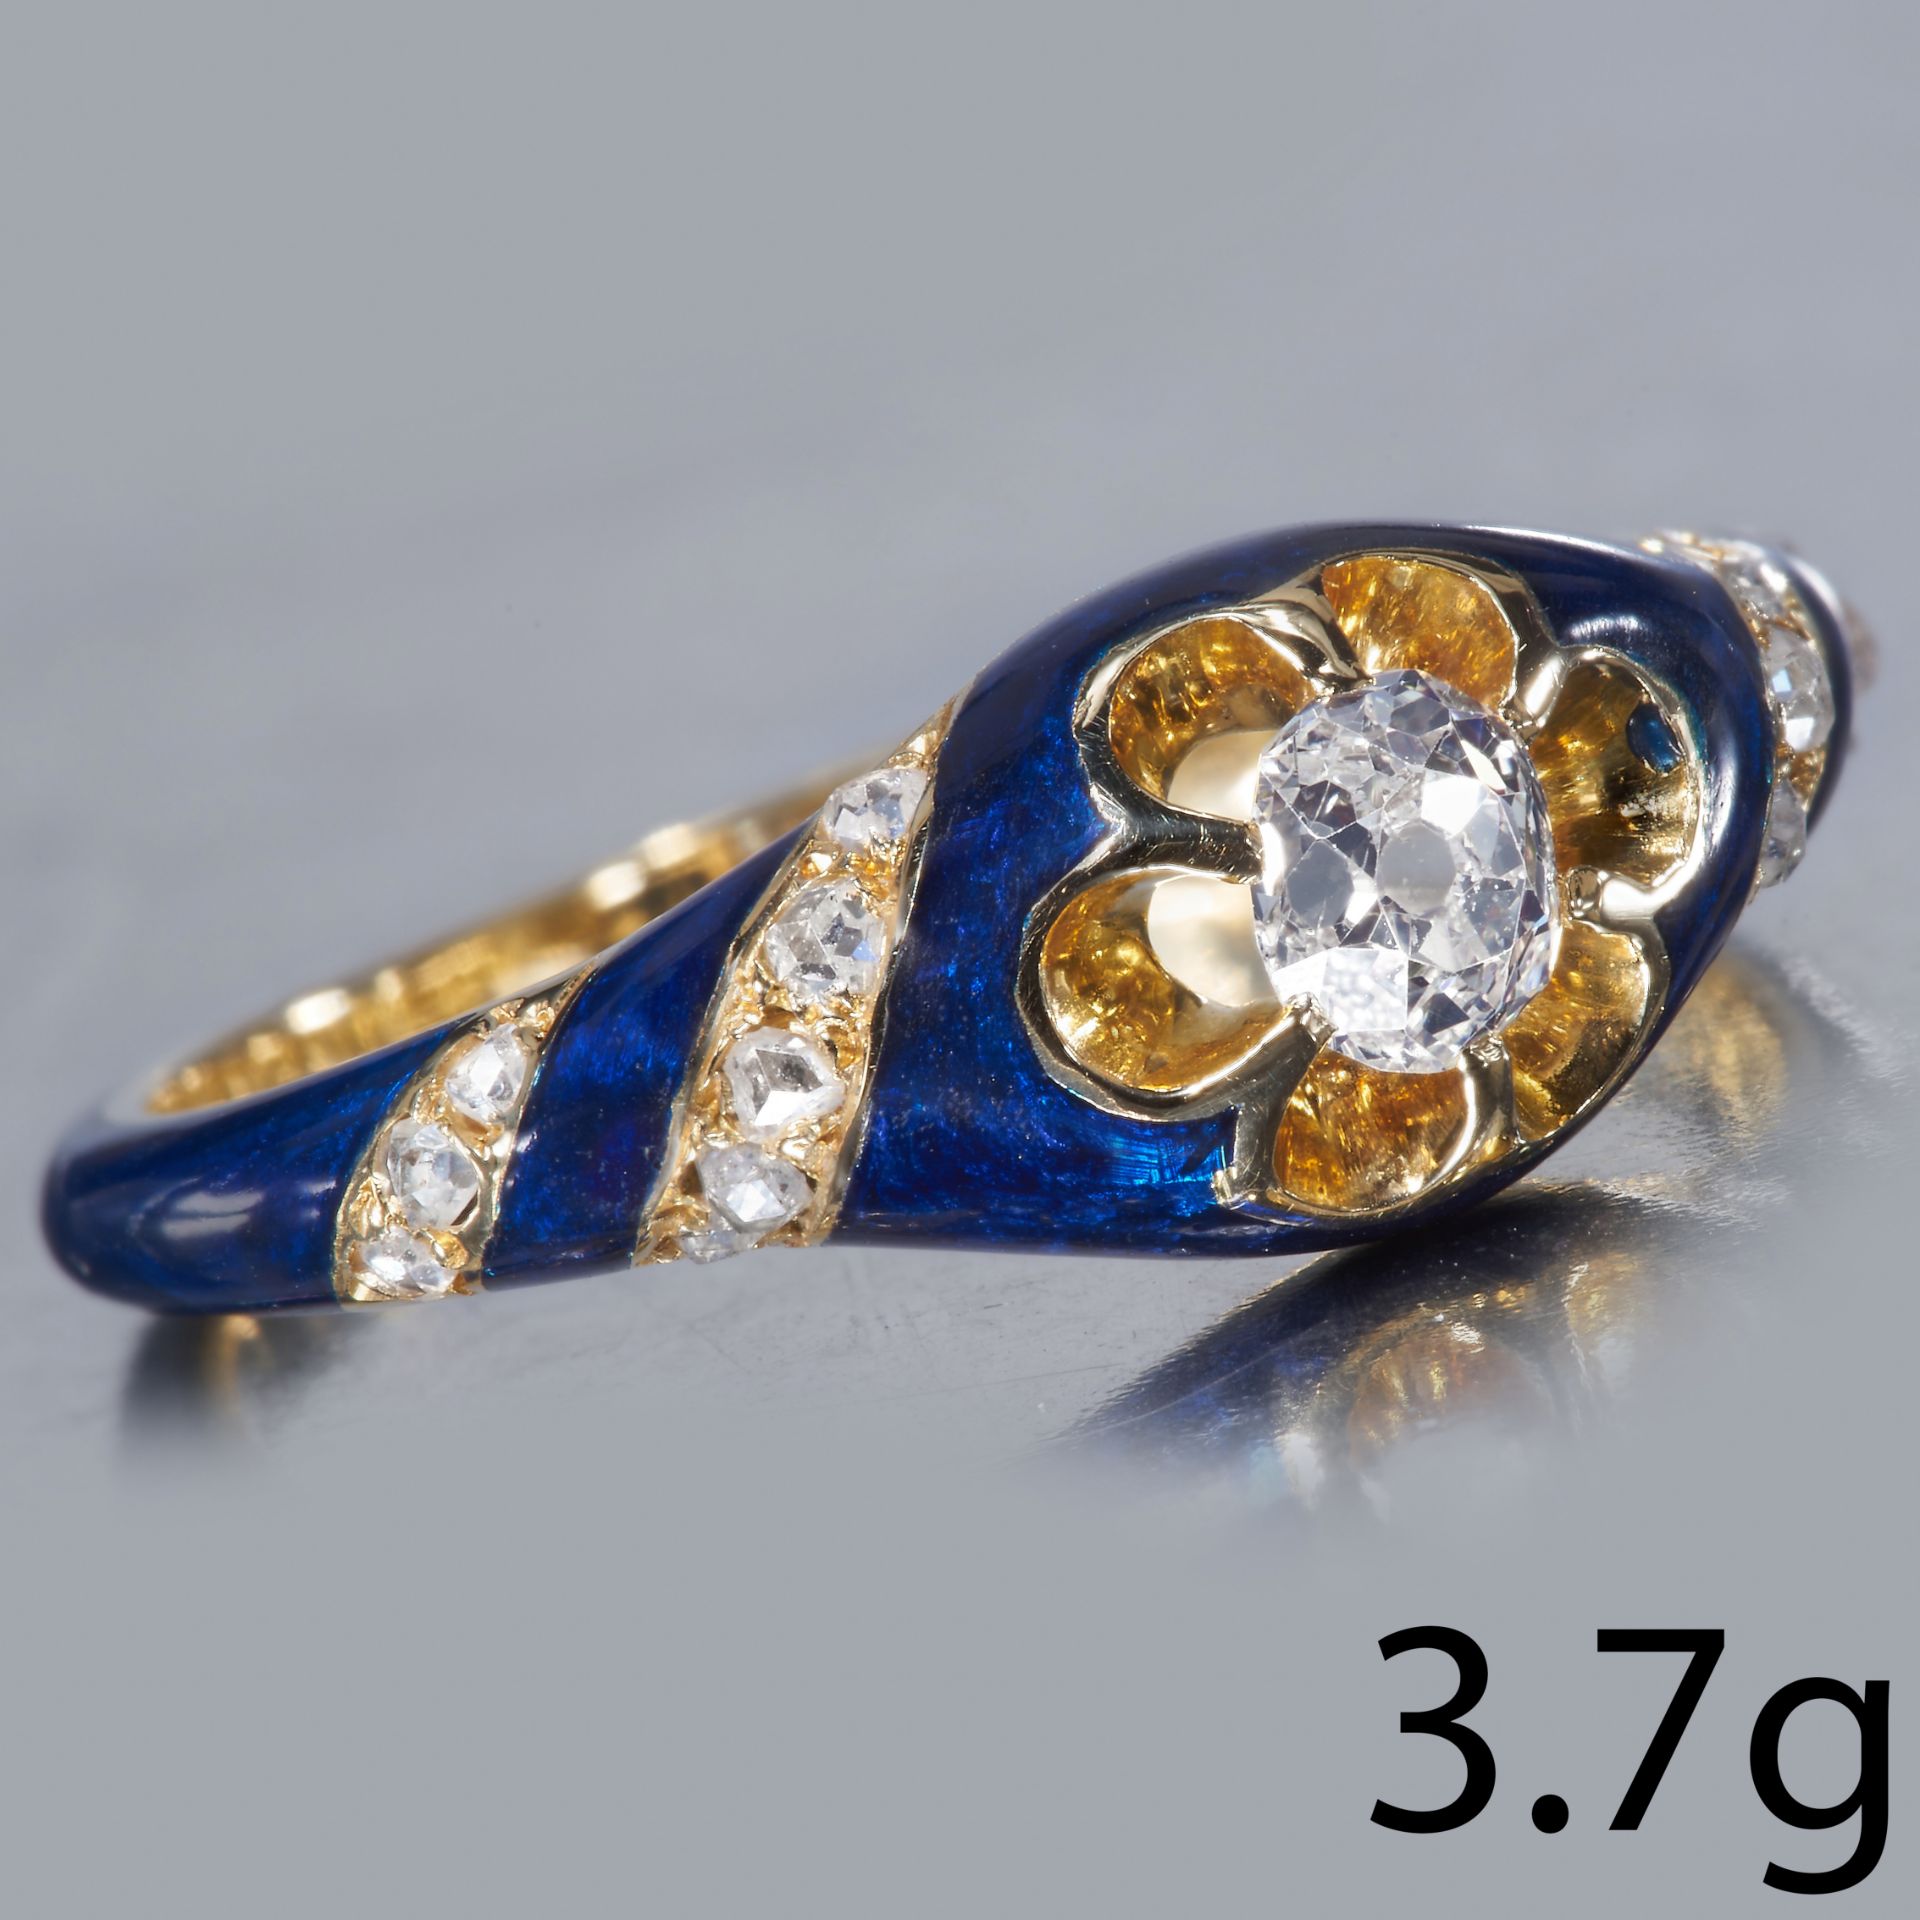 ANTIQUE VICTORIAN ENAMEL AND DIAMOND RING - Image 2 of 2